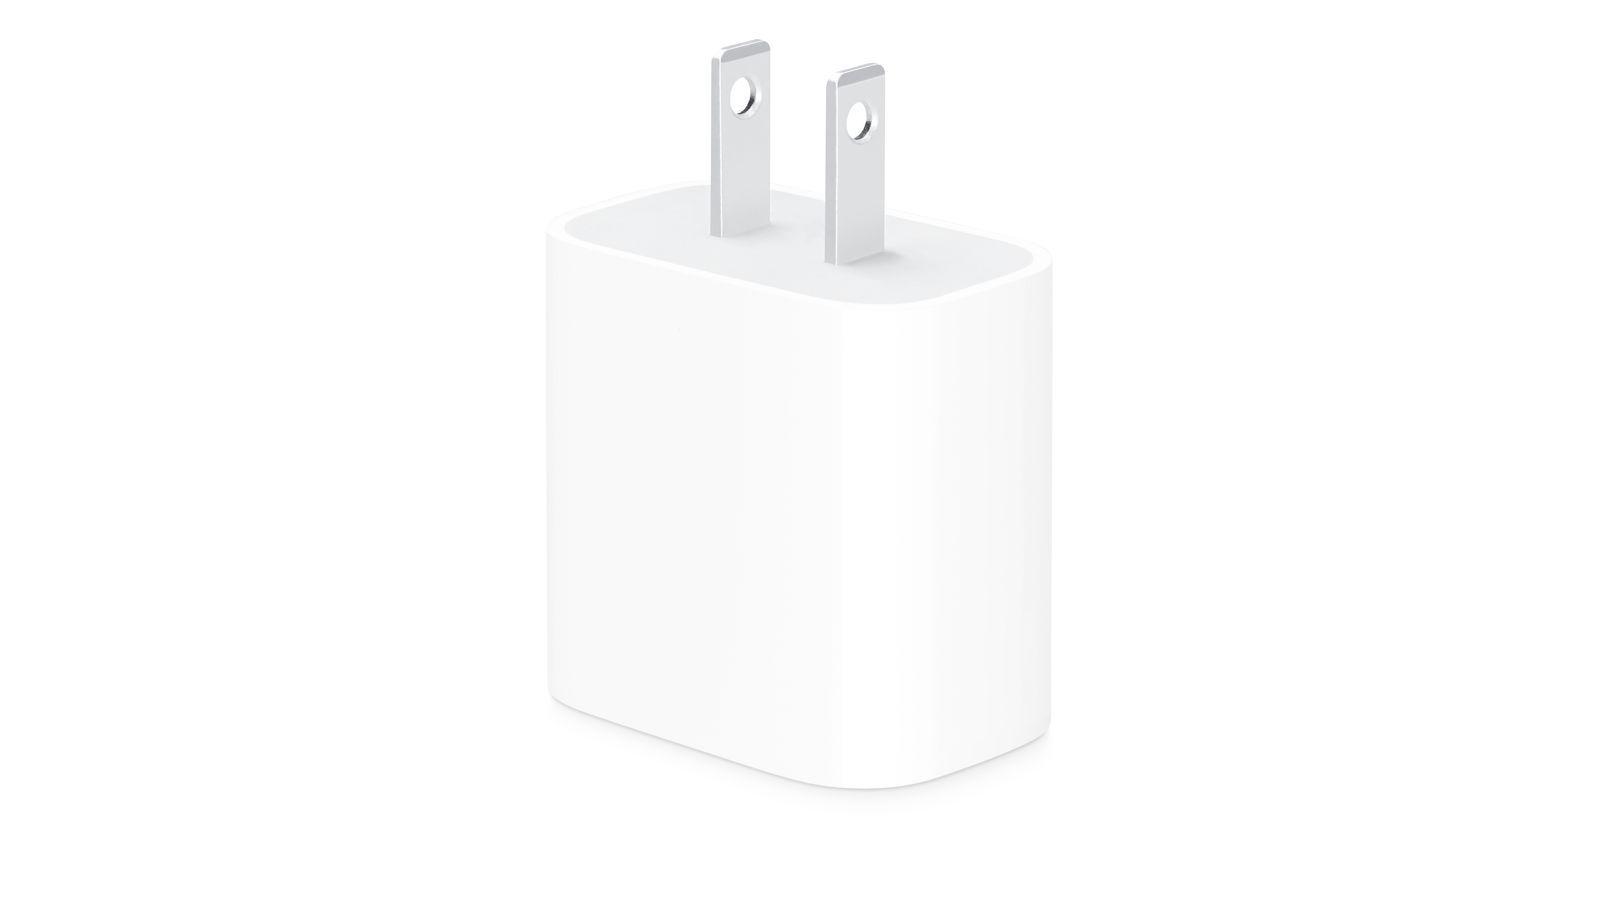 Deals: Woot's New Sale Includes Discounts on Apple's 20W USB-C Power Adapter and More - macrumors.com